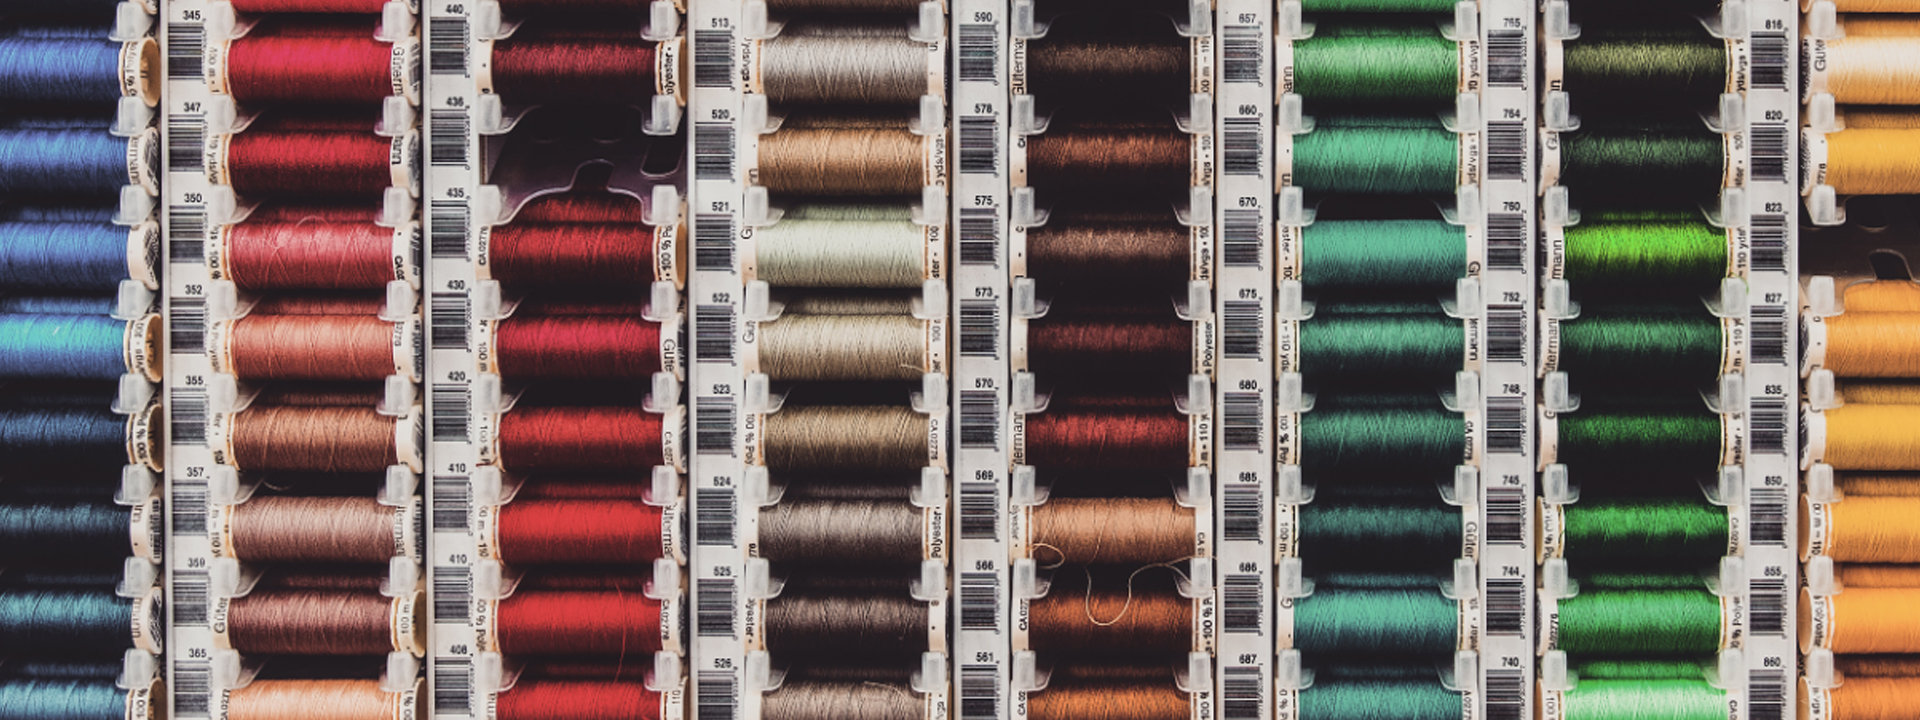 A colorful display of thread spools. Image courtesy of Canva